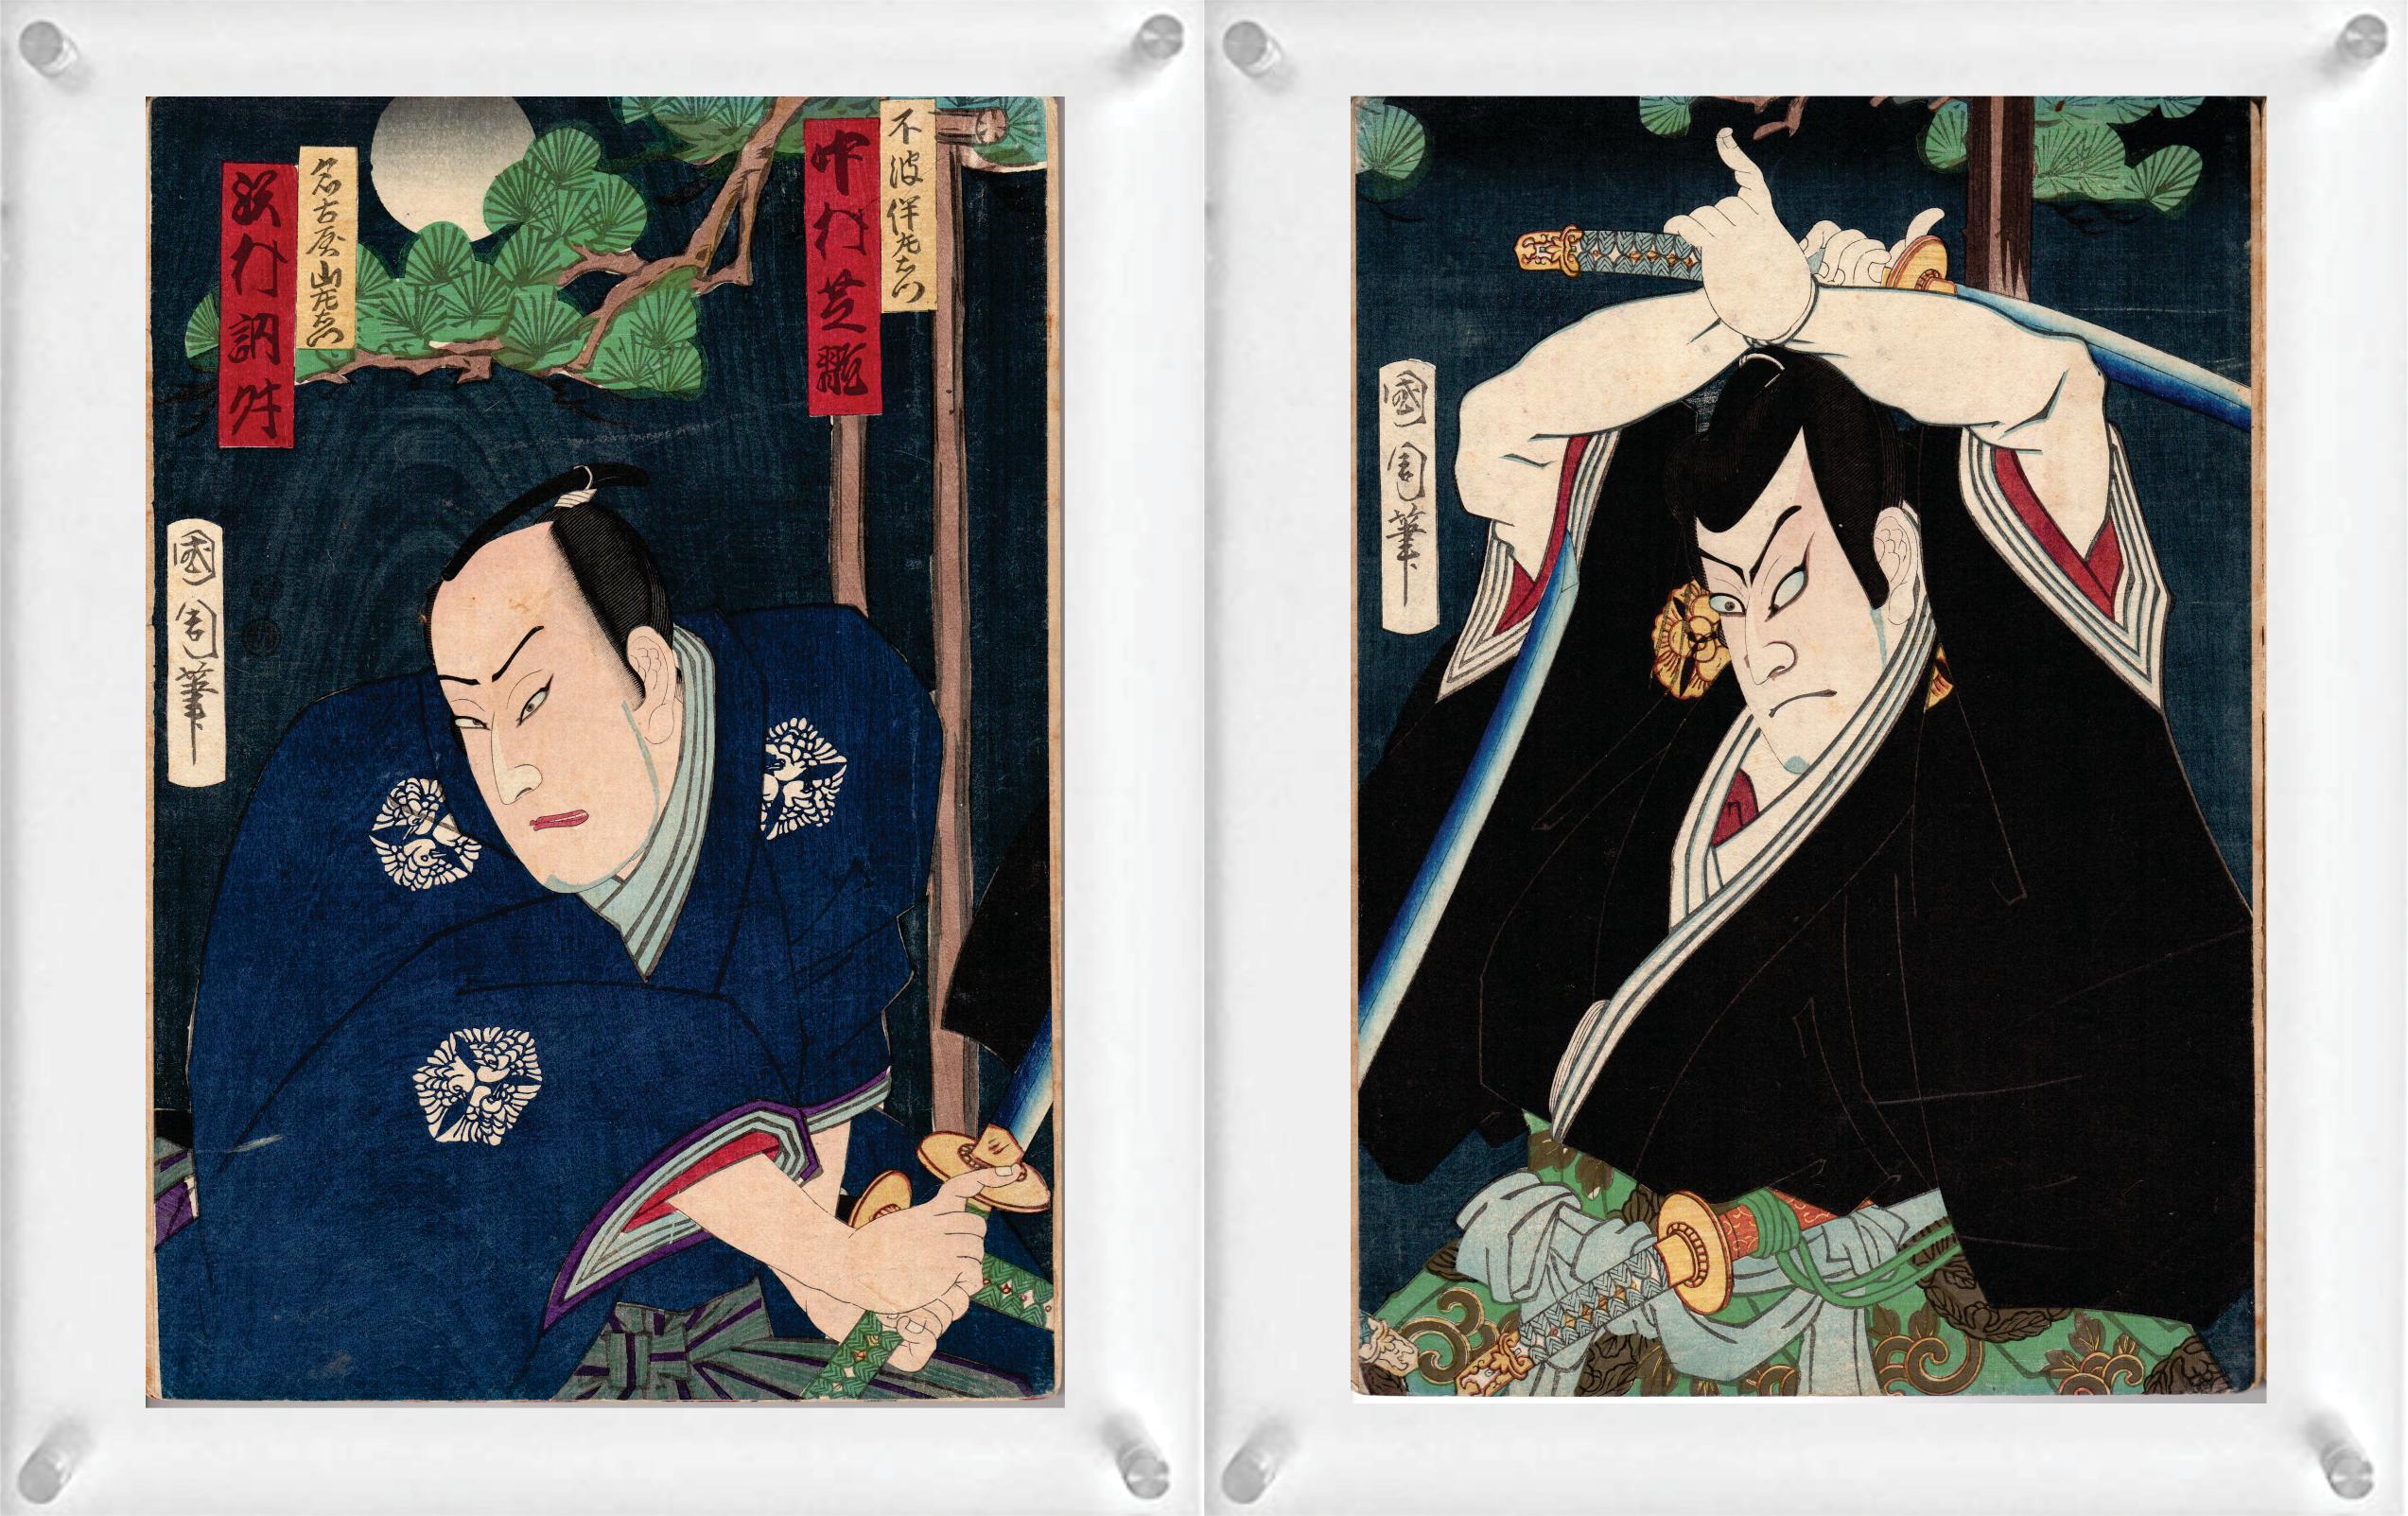 Four Japanese Woodblock Prints (Double-Side) by Toyohara Kunichika (Diptych), and Shosai Ikkei - from Thirty-Six Comics of the Famous Places of Tokyo.

Note: These are only two pieces of woodblock prints with 4 images. They are double-sided with